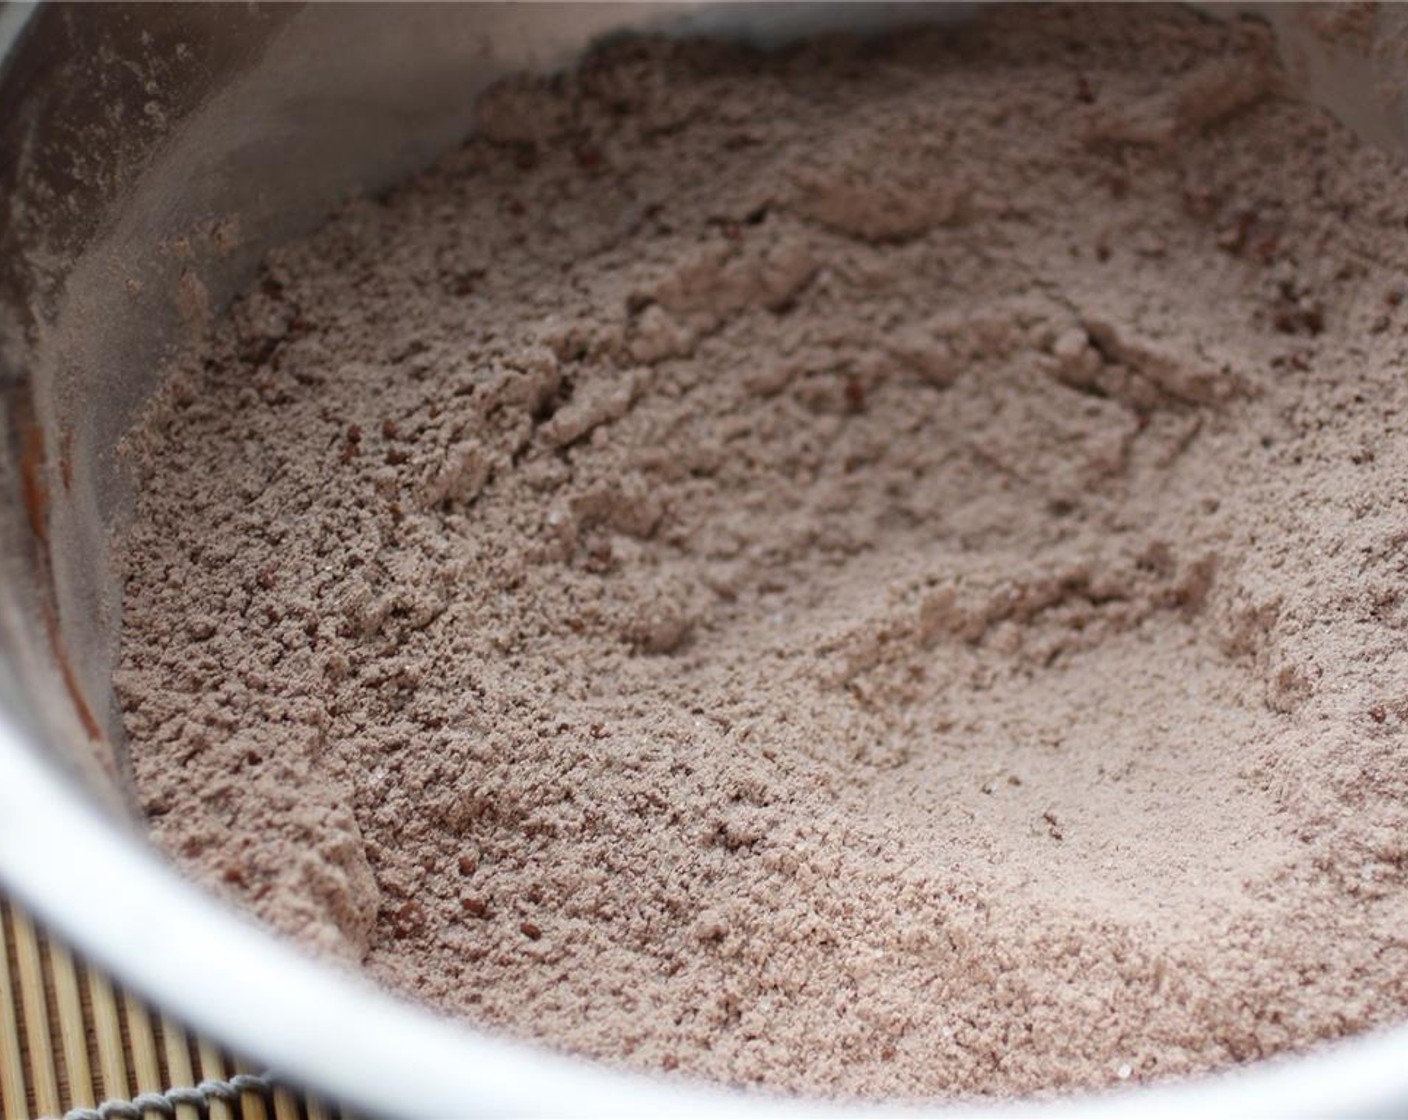 step 4 In a large bowl, mix together the Gluten-Free All-Purpose Flour (1 1/2 cups), Granulated Sugar (1 cup), Baking Soda (1 tsp), Salt (1/2 tsp), Xanthan Gum (3/4 tsp), Unsweetened Cocoa Powder (1/3 cup) and Ground Cinnamon (1 tsp).